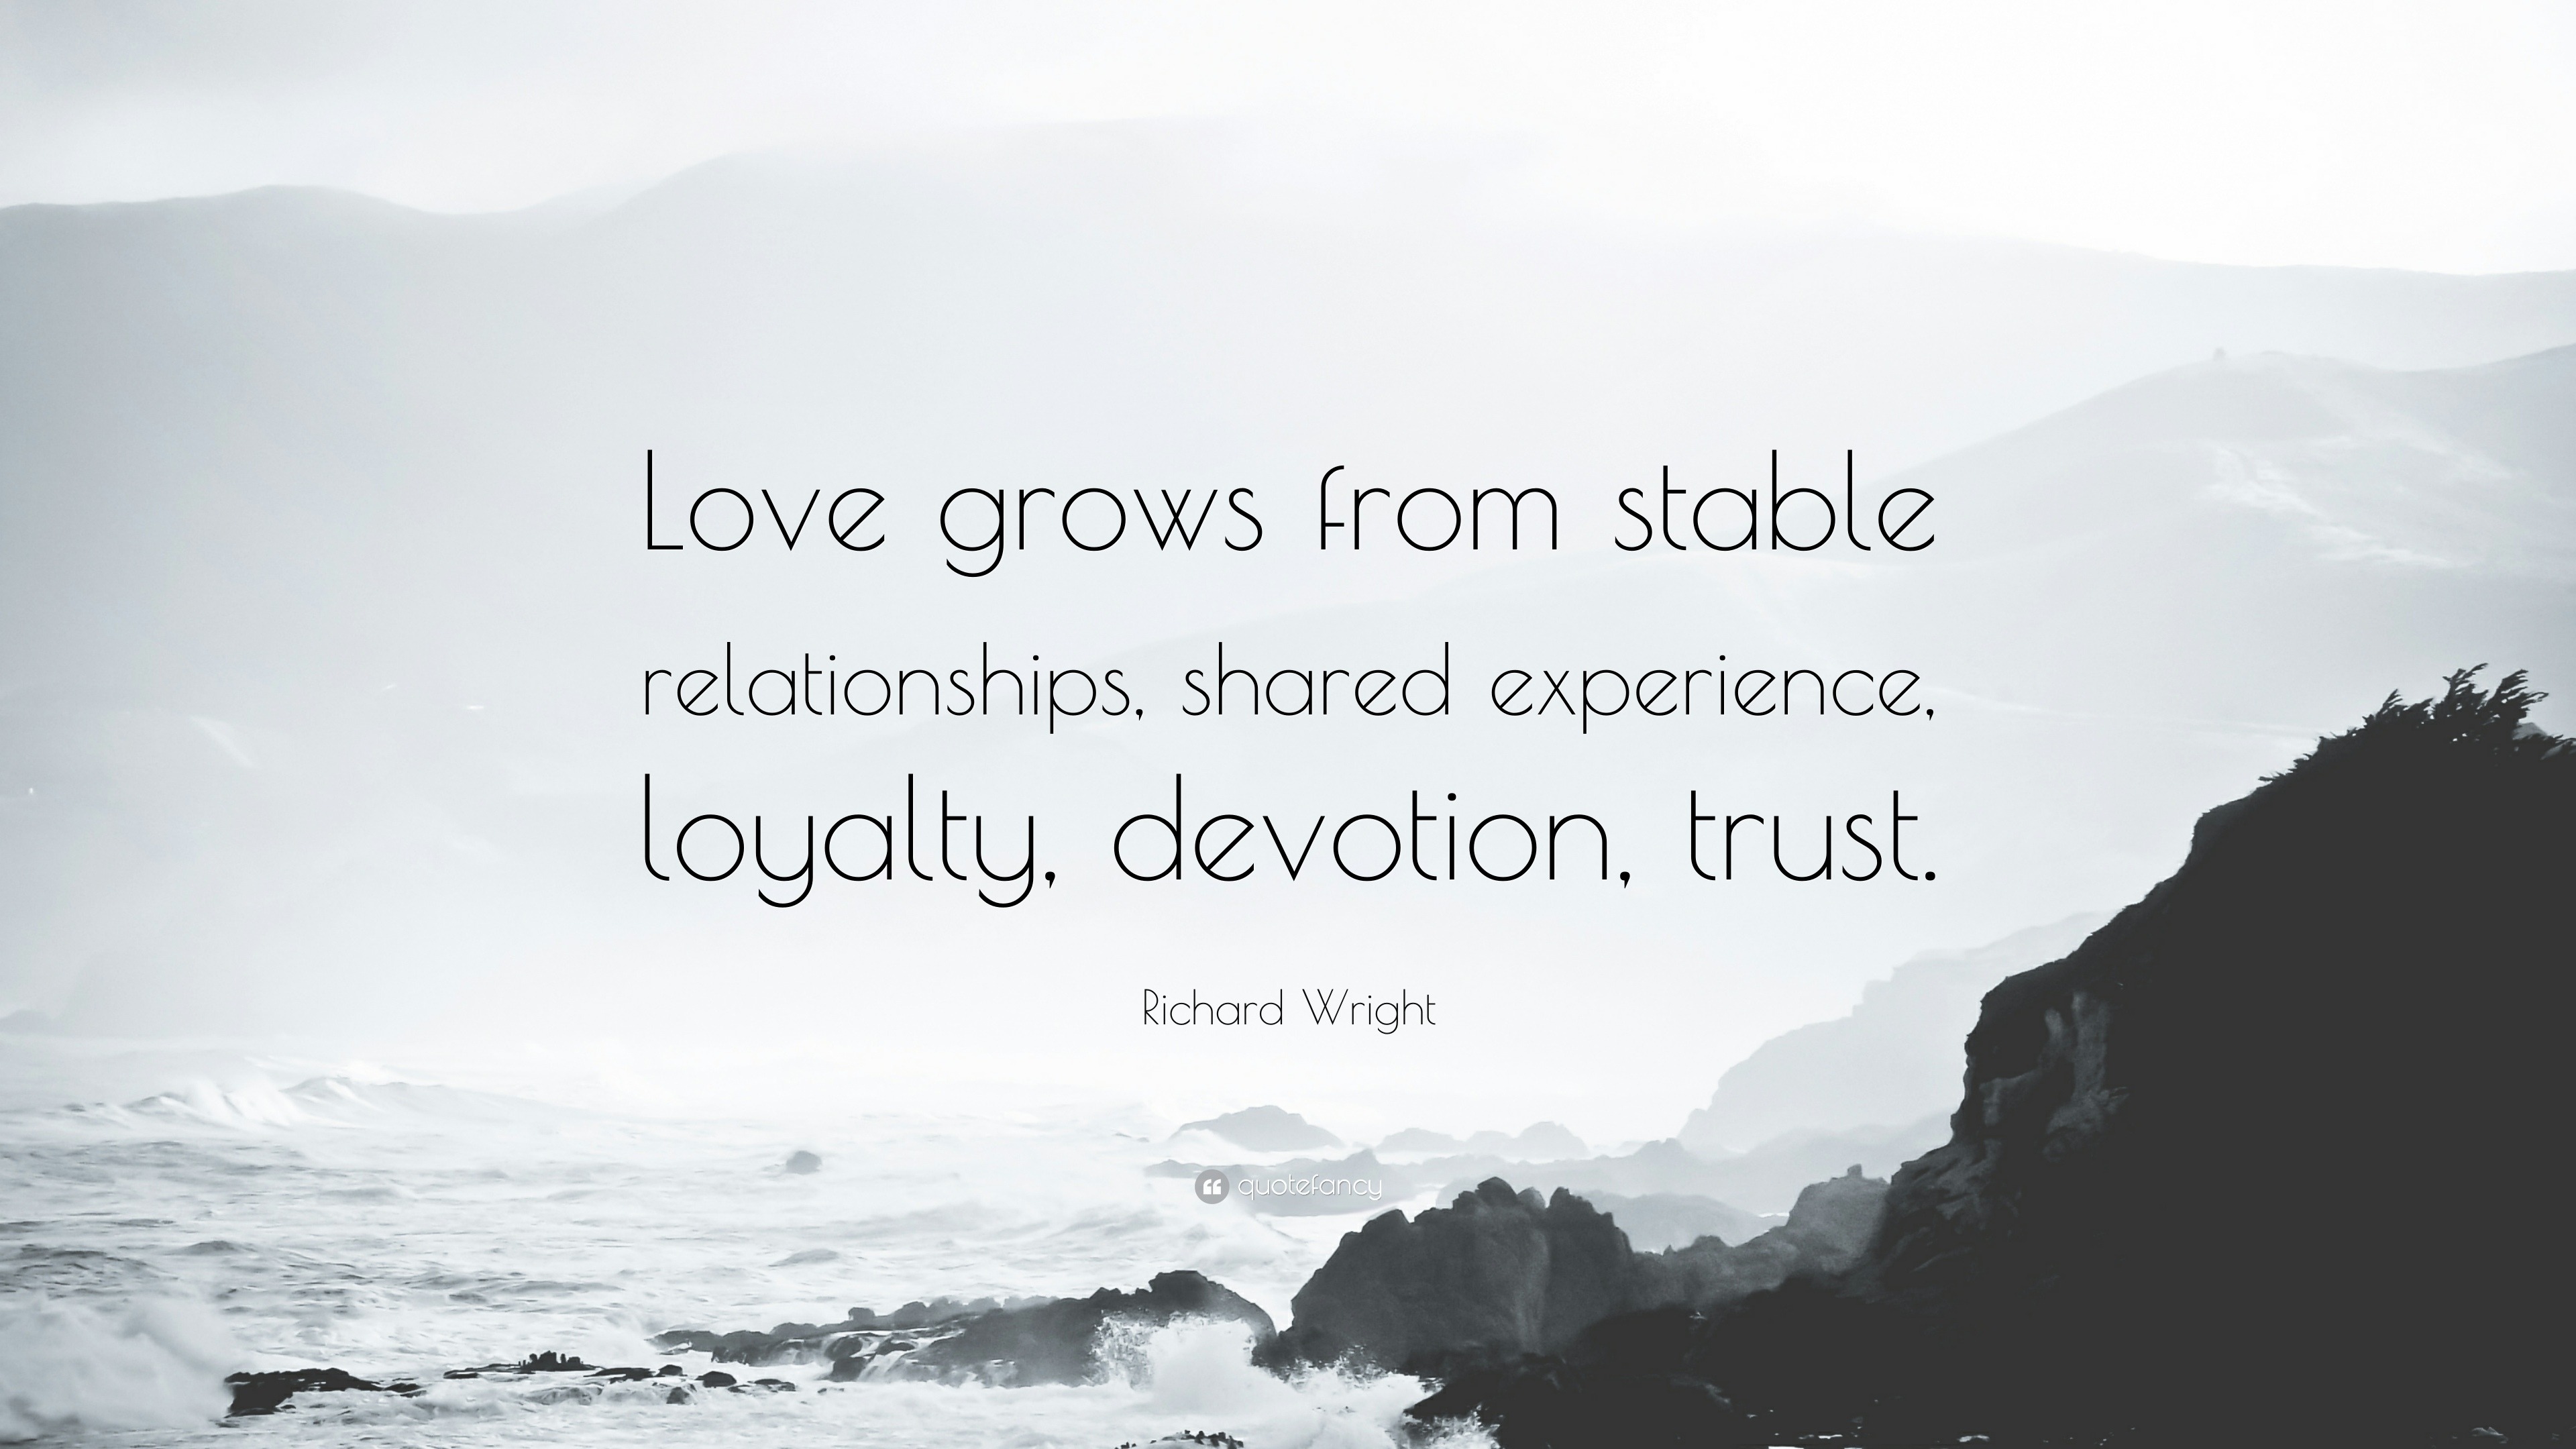 Richard Wright Quote “Love grows from stable relationships shared experience loyalty